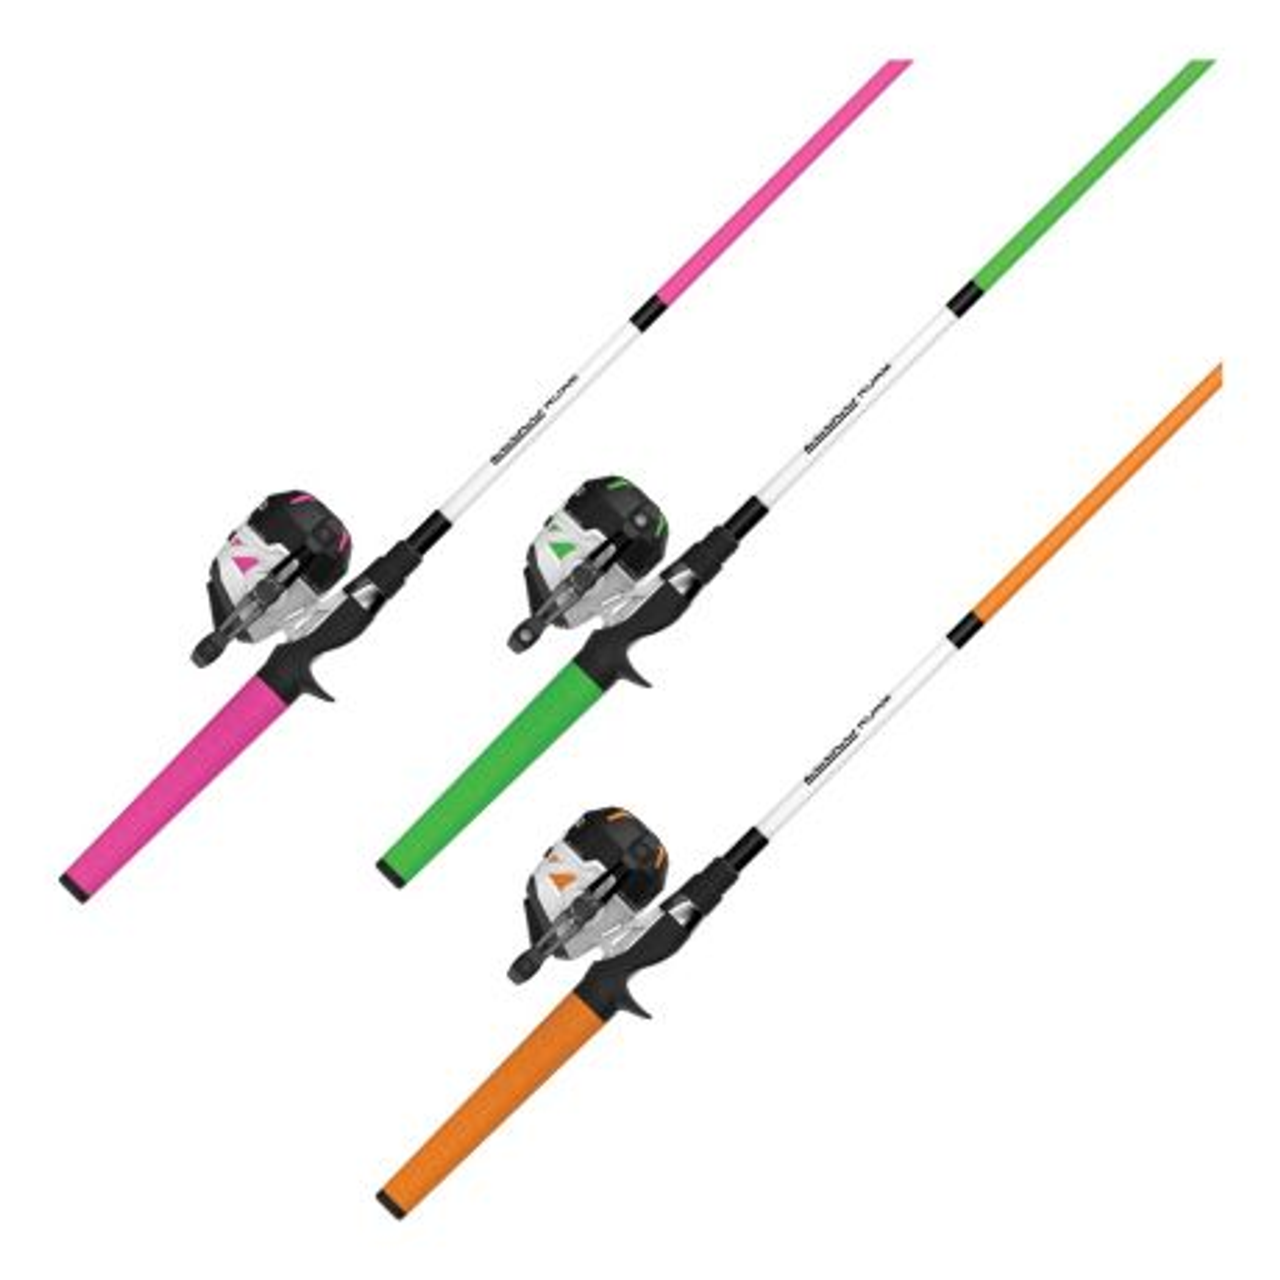 Zebco Roam 6 Spinning Combo, 2 piece, Pink - THE FISHING SOURCE